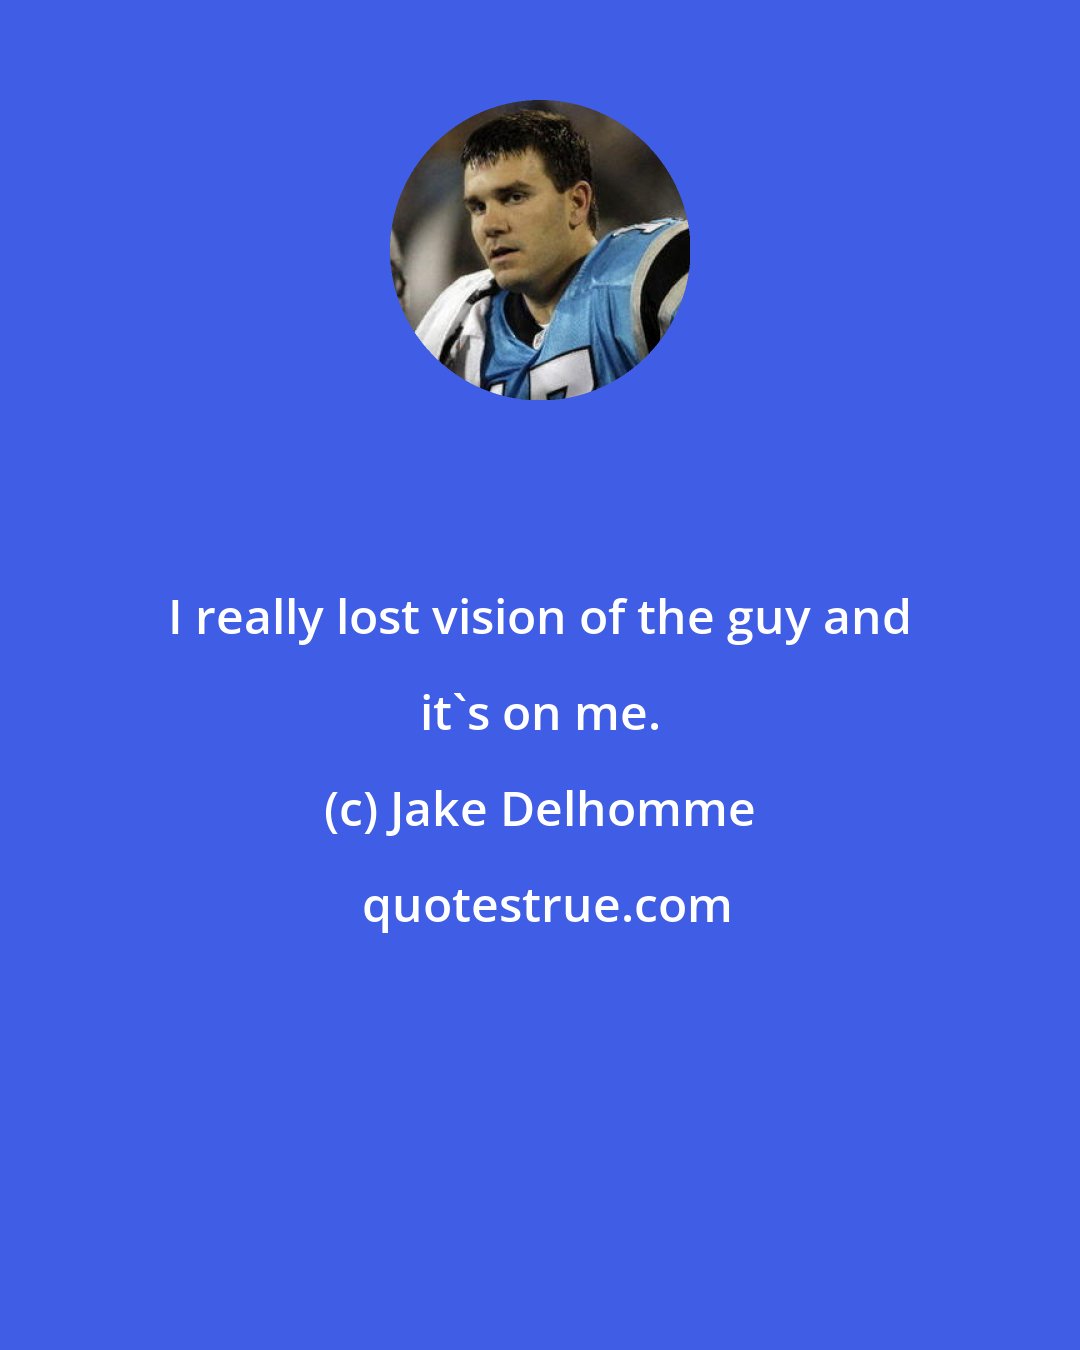 Jake Delhomme: I really lost vision of the guy and it's on me.